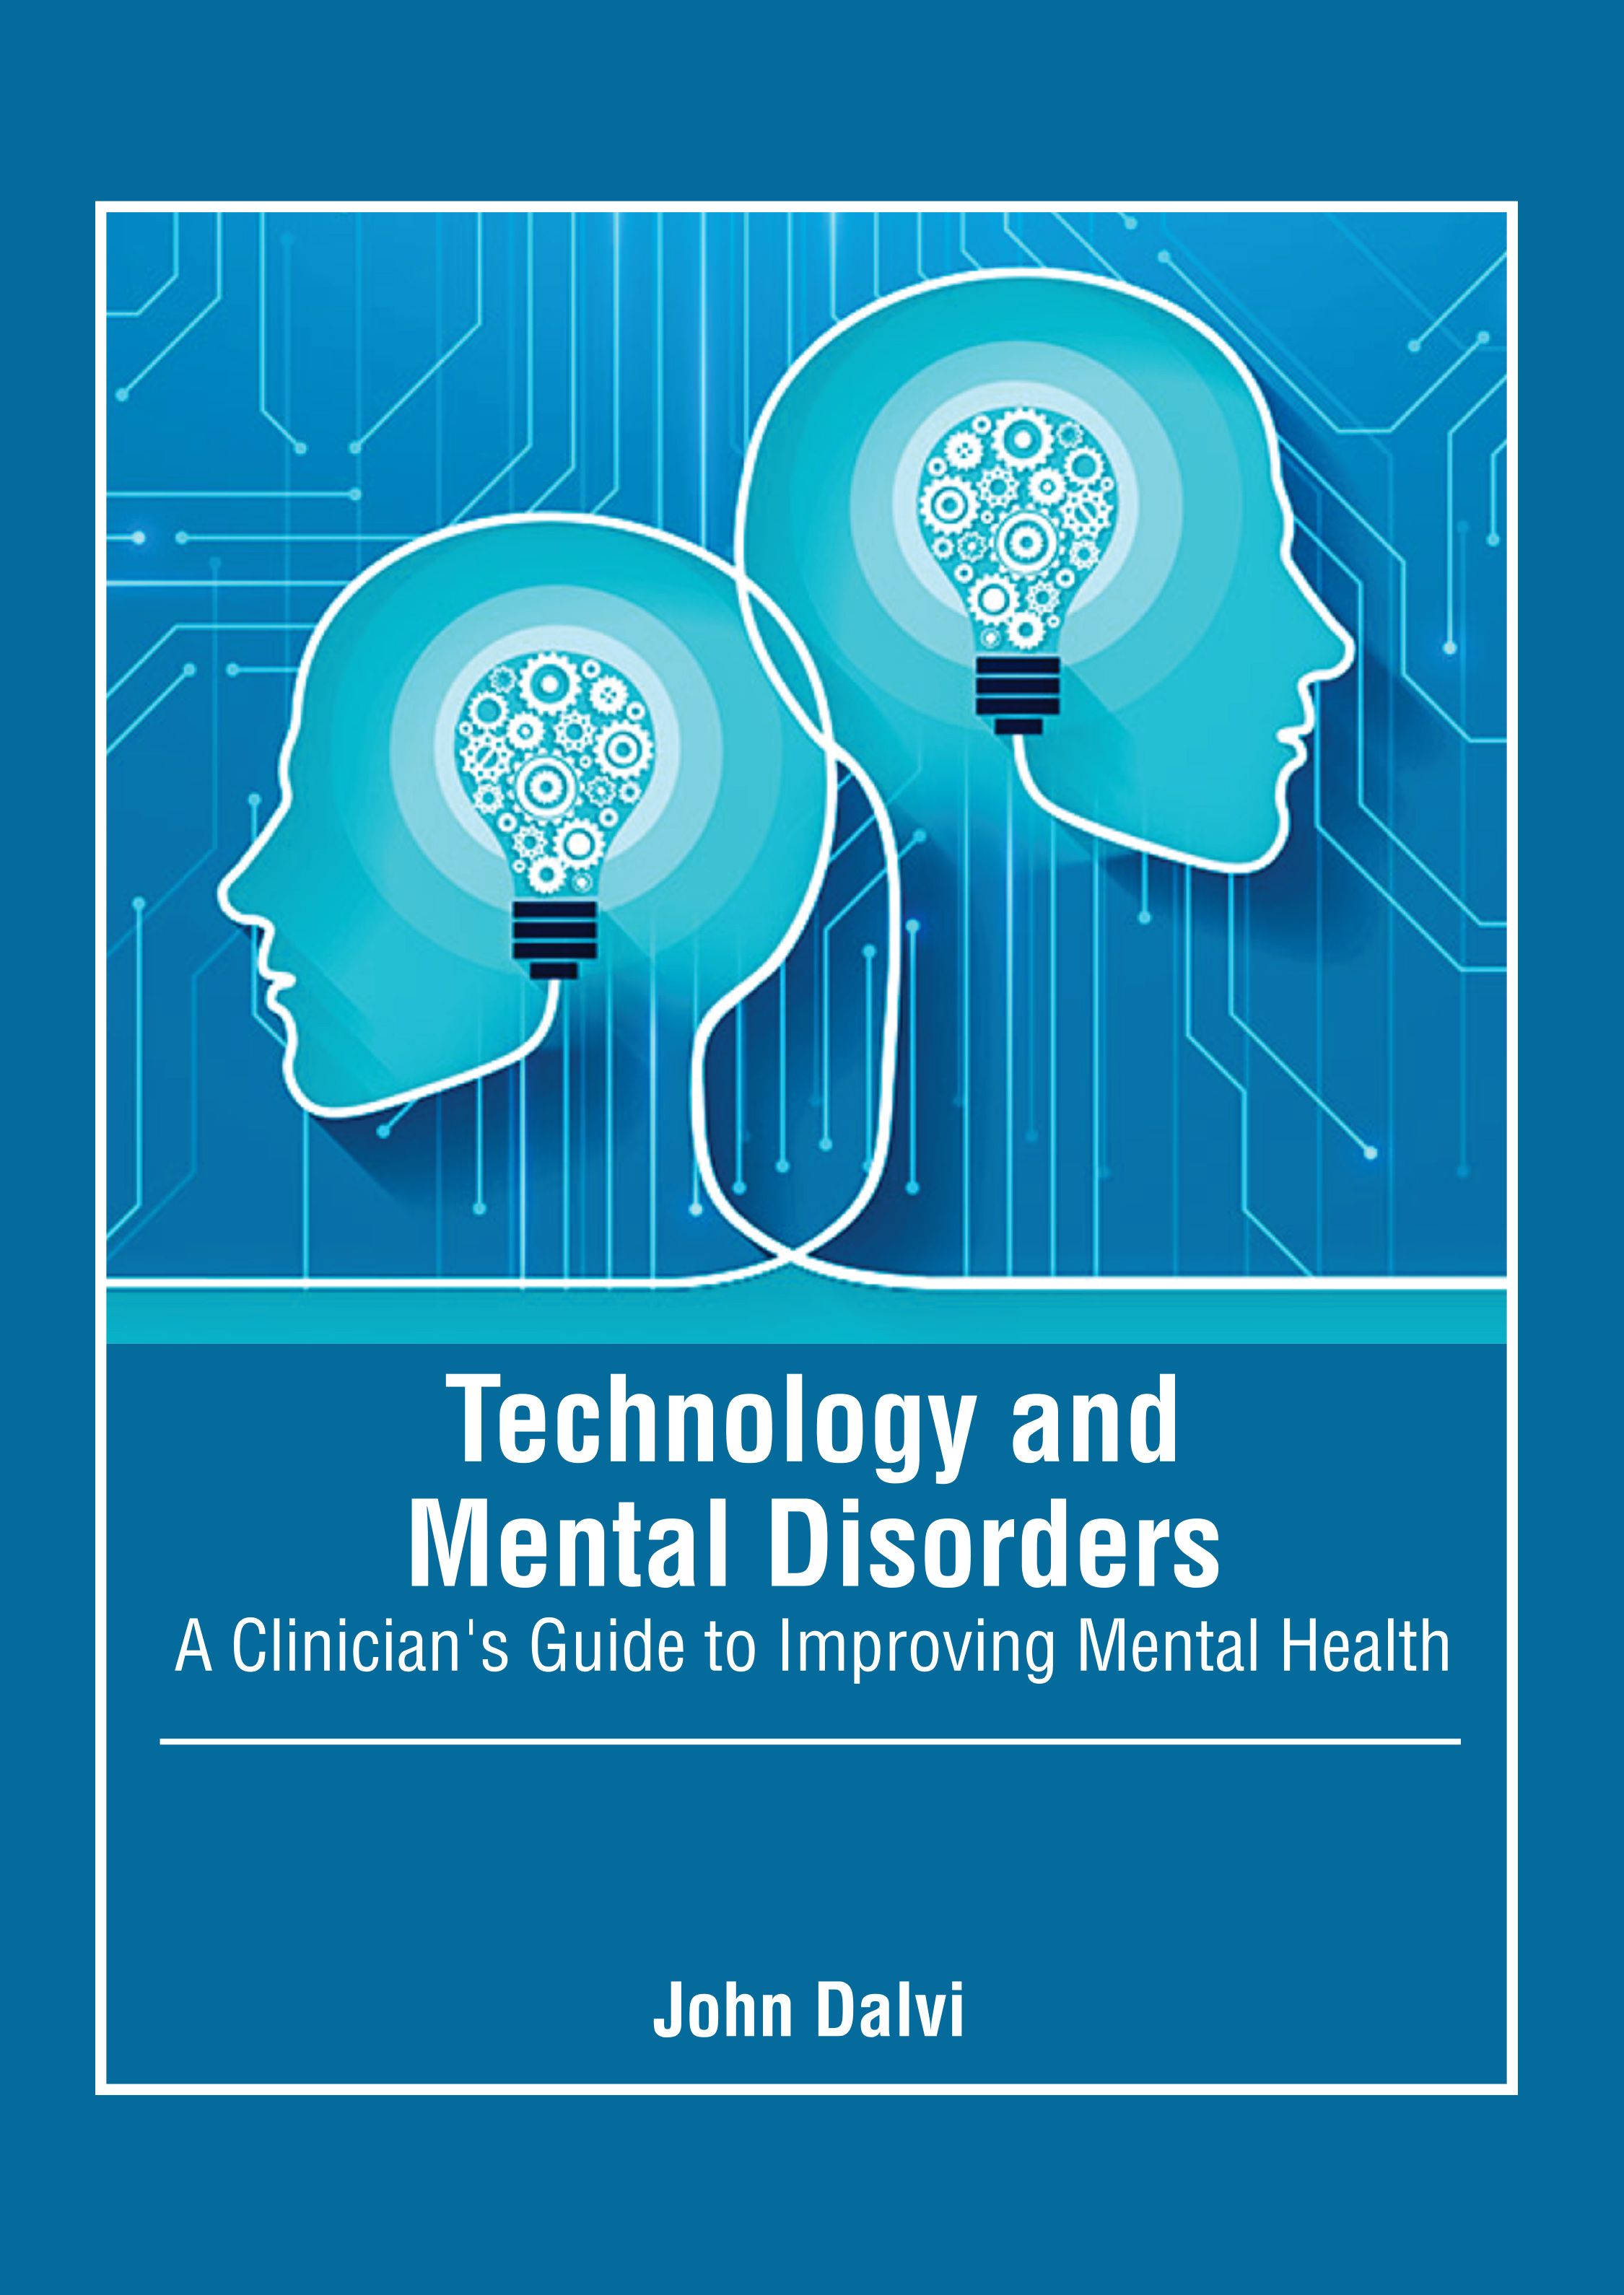 TECHNOLOGY AND MENTAL DISORDERS: A CLINICIAN'S GUIDE TO IMPROVING MENTAL HEALTH